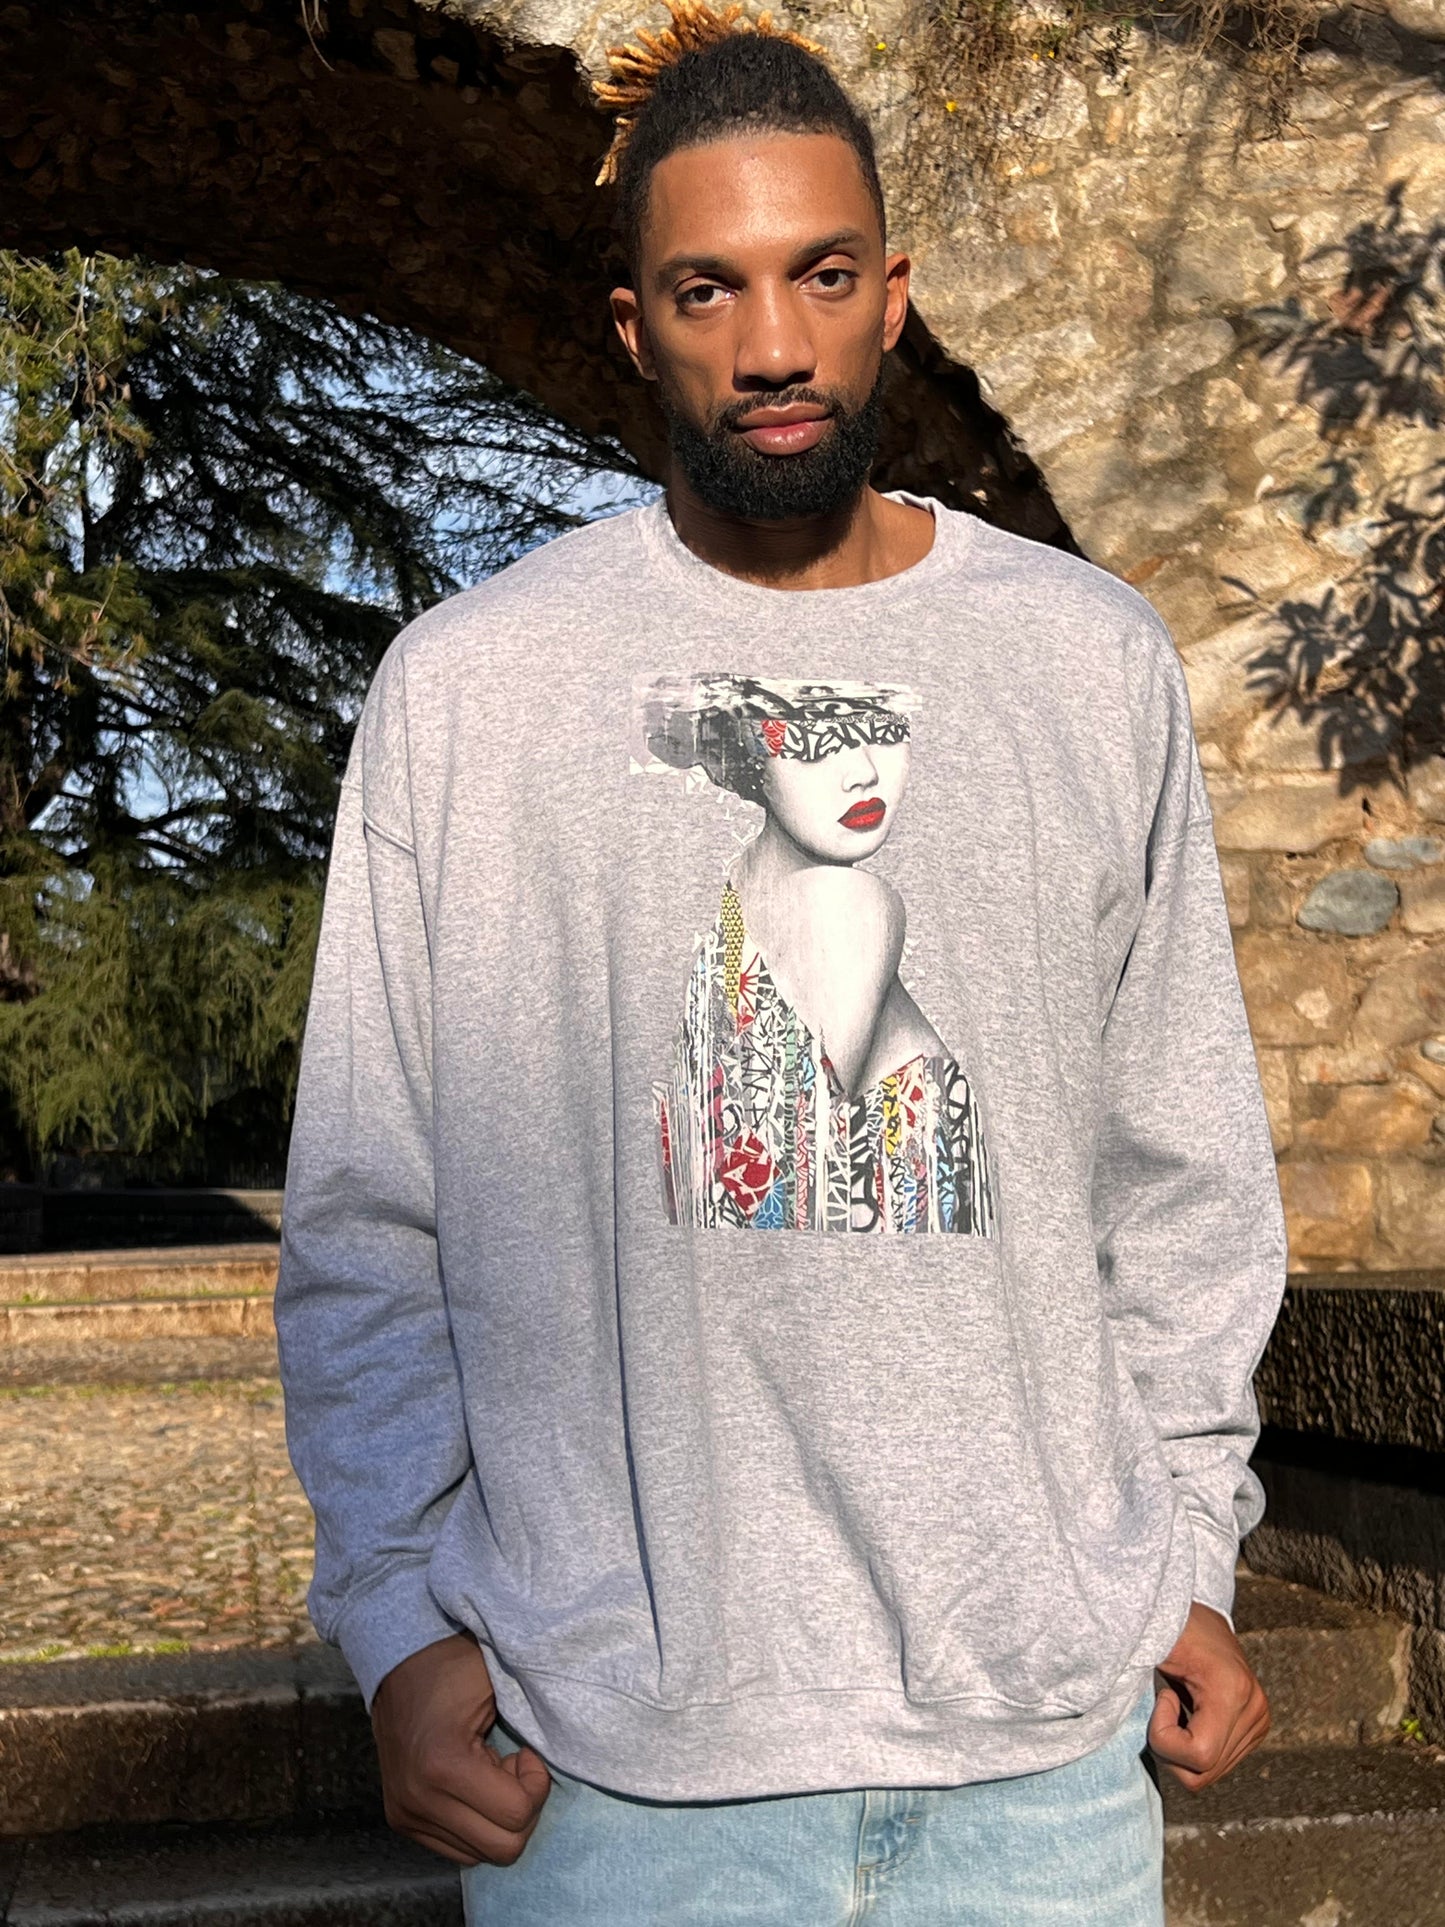 Khem Birch is wearing a sturdy and warm sweatshirt, bound to keep him warm in the colder months. It's a pre-shrunk, classic-fit sweater made with air-jet spun yarn for a soft feel and reduced pilling.